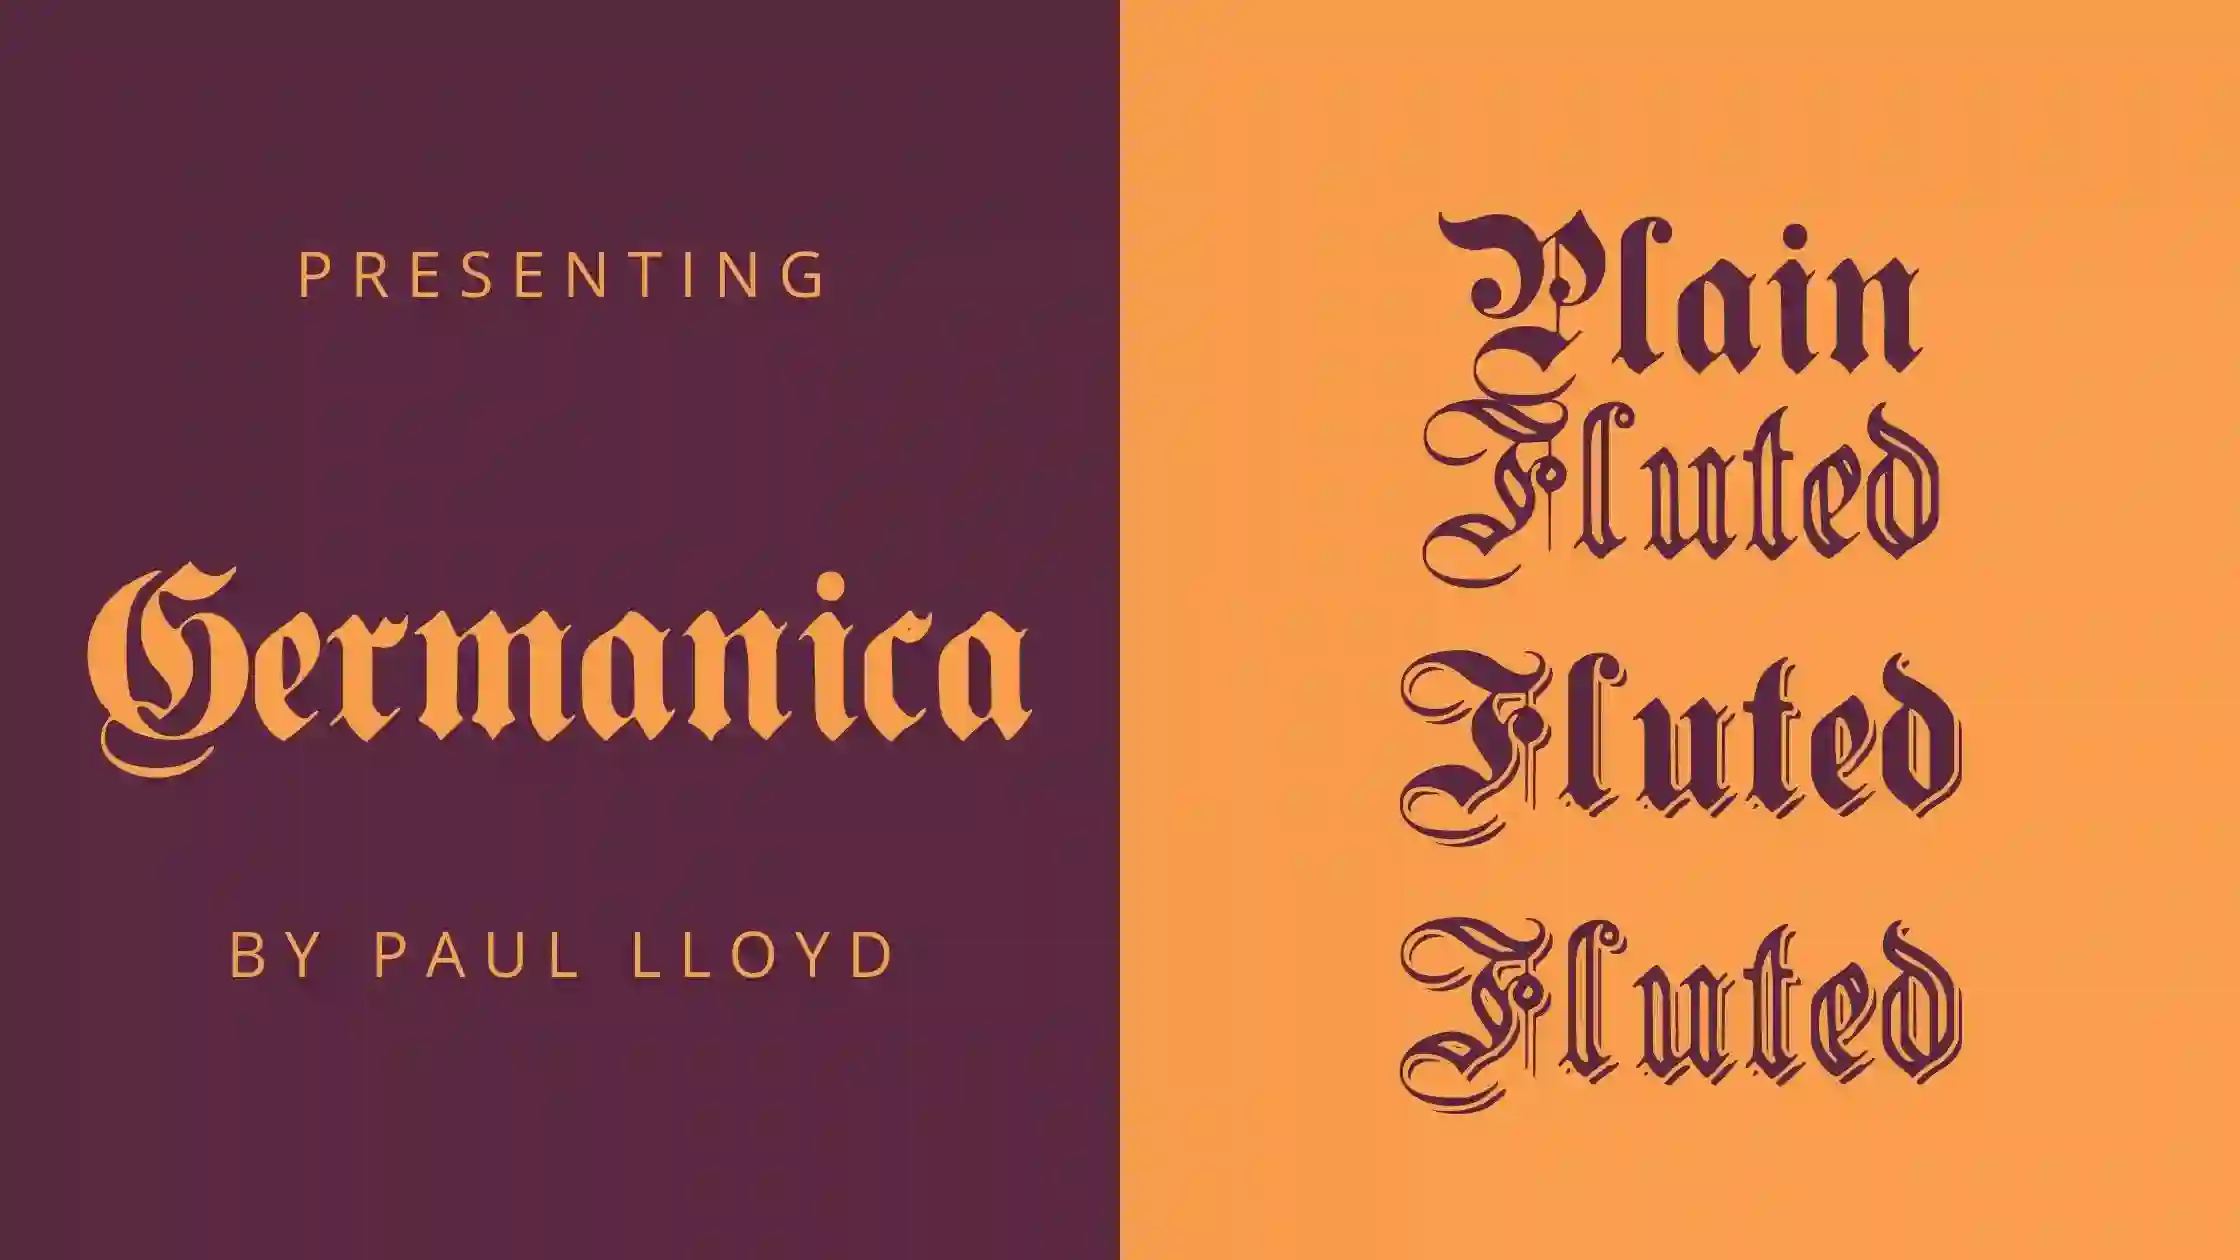 Germanica Font Free Download